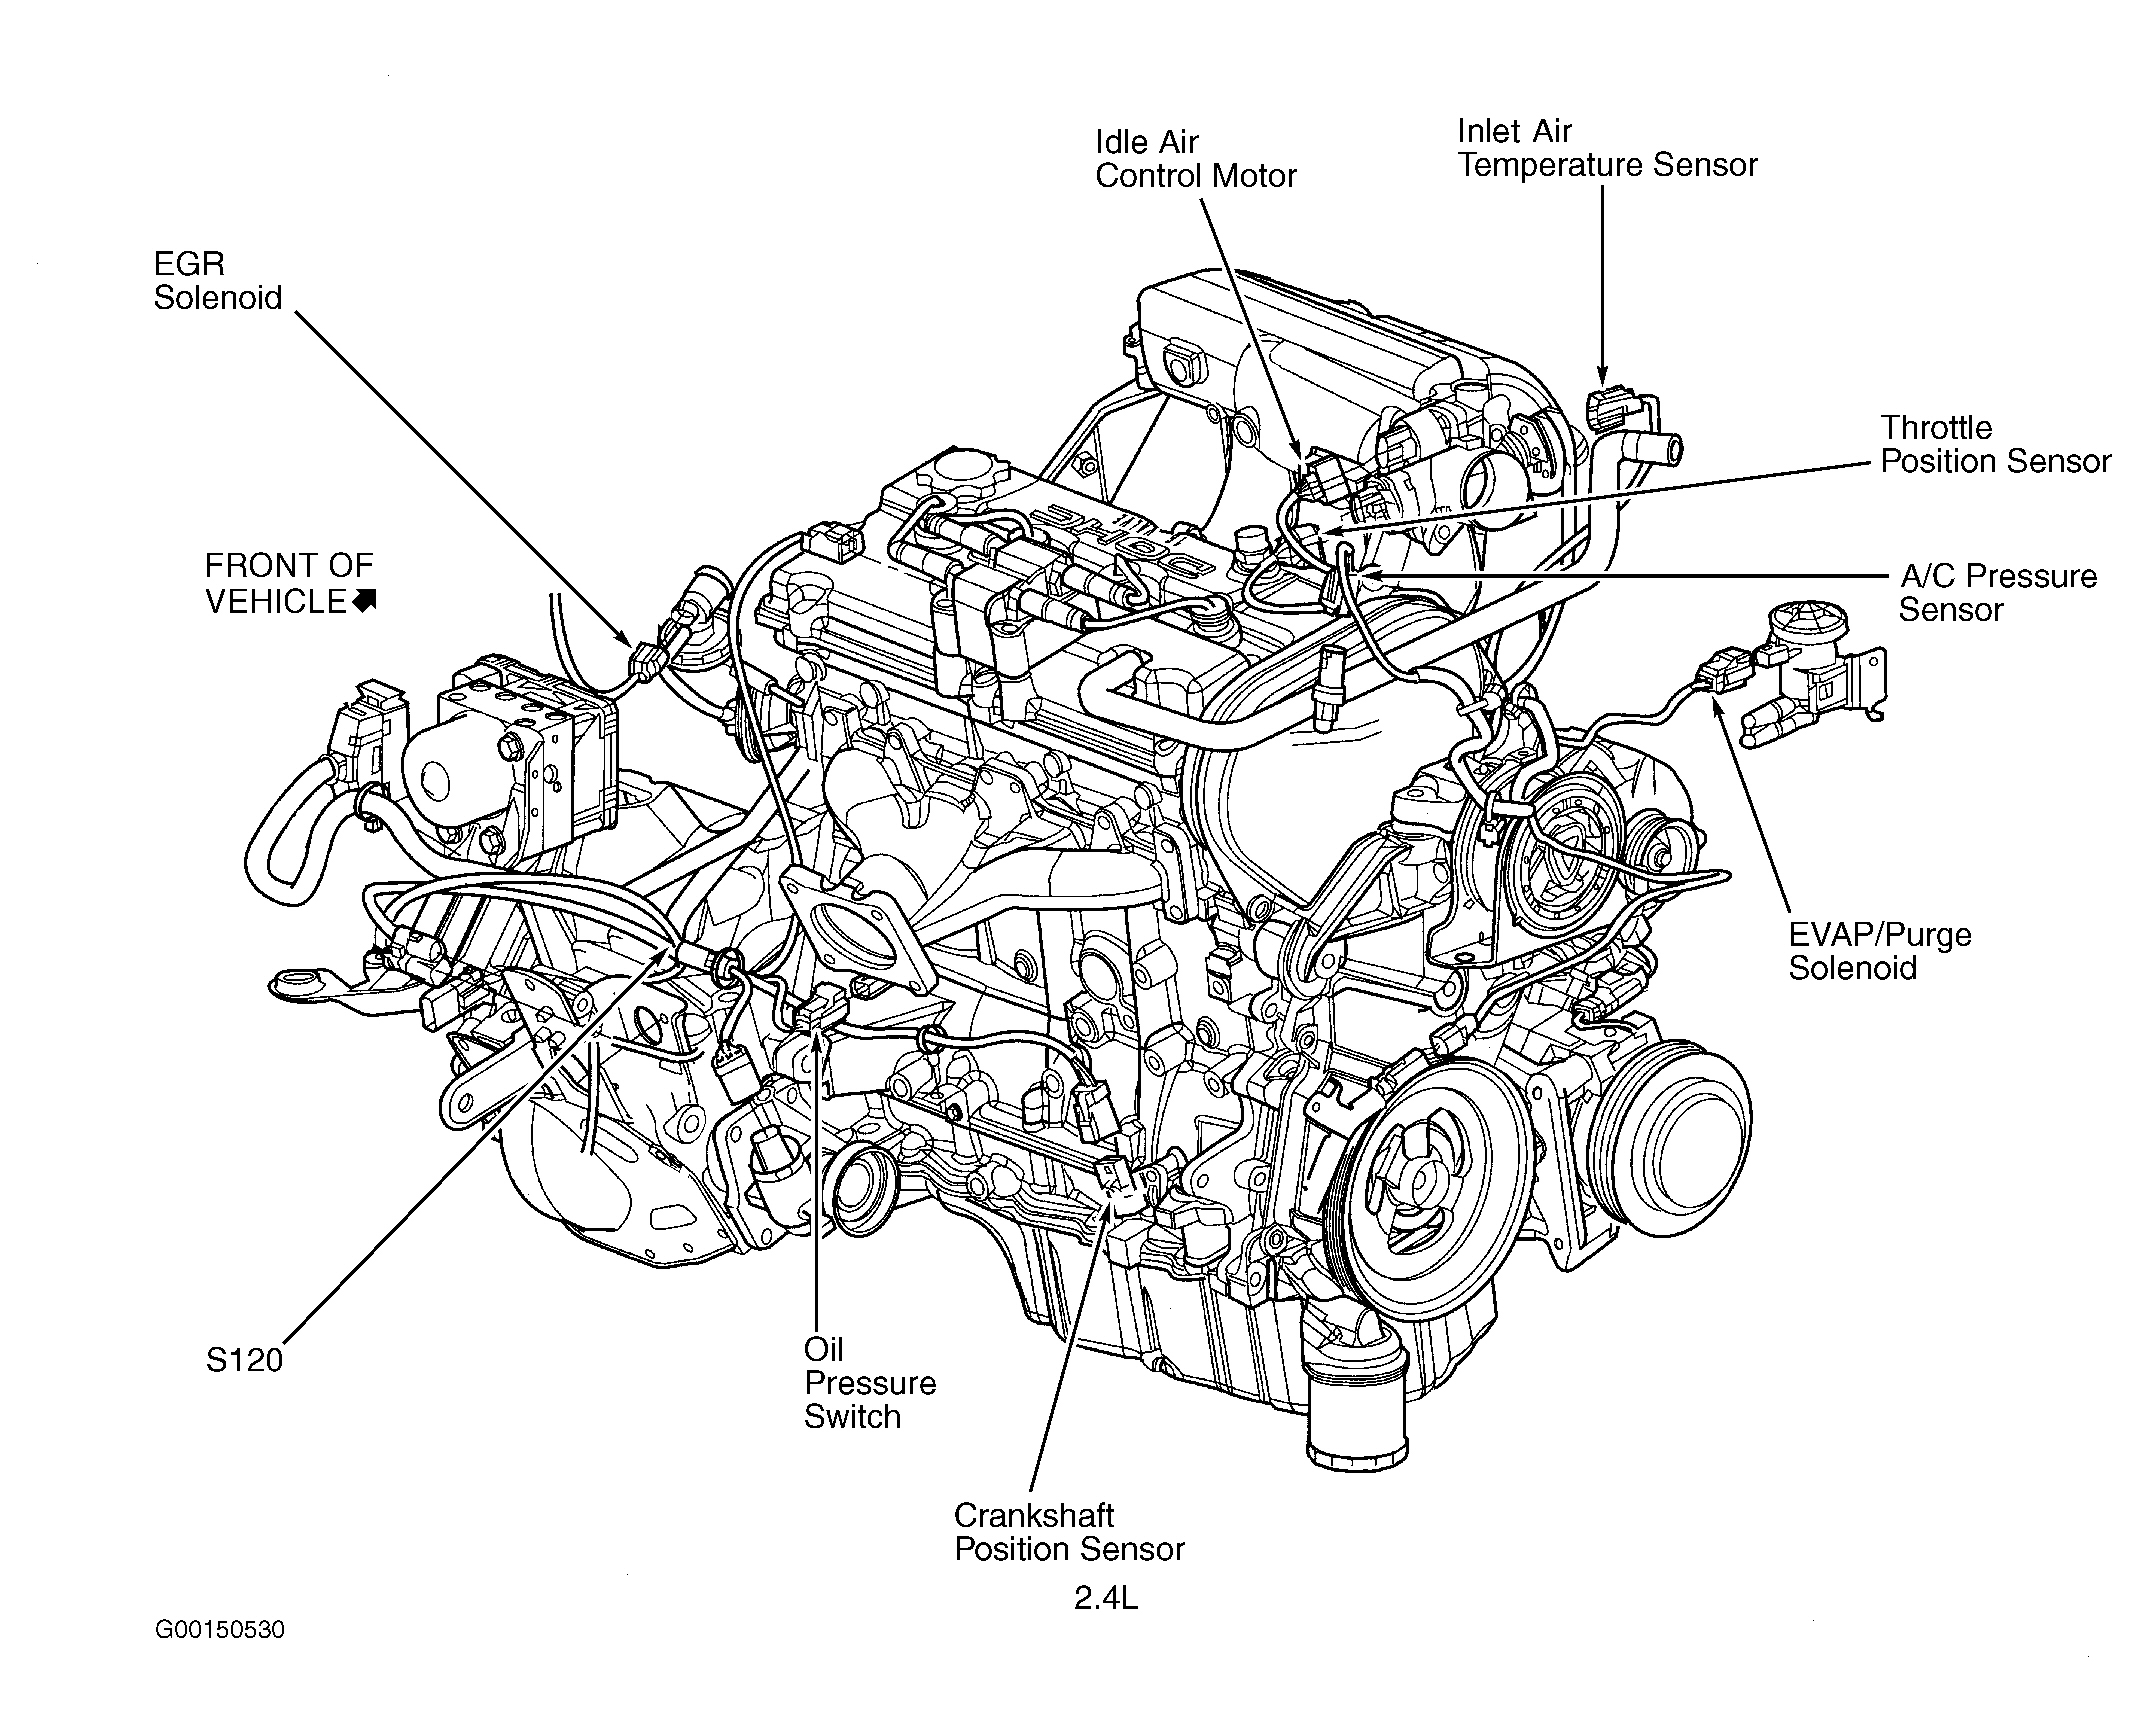 Dodge Grand Caravan Sport 2003 - Component Locations -  Right Side Of Engine (2.4L)